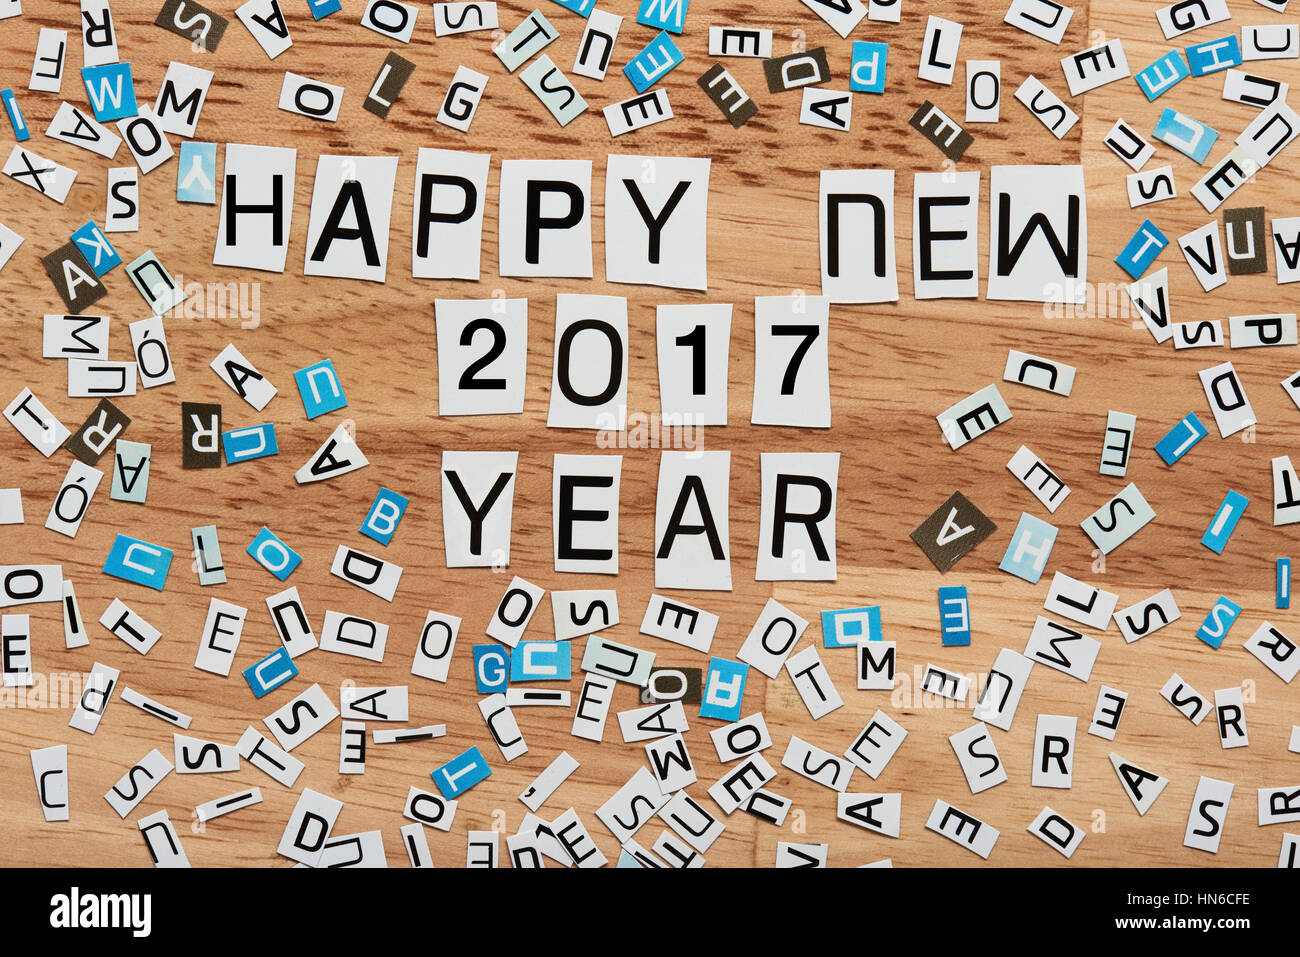 happy 2017 new year word cut out from magazine on wood background Stock Photo